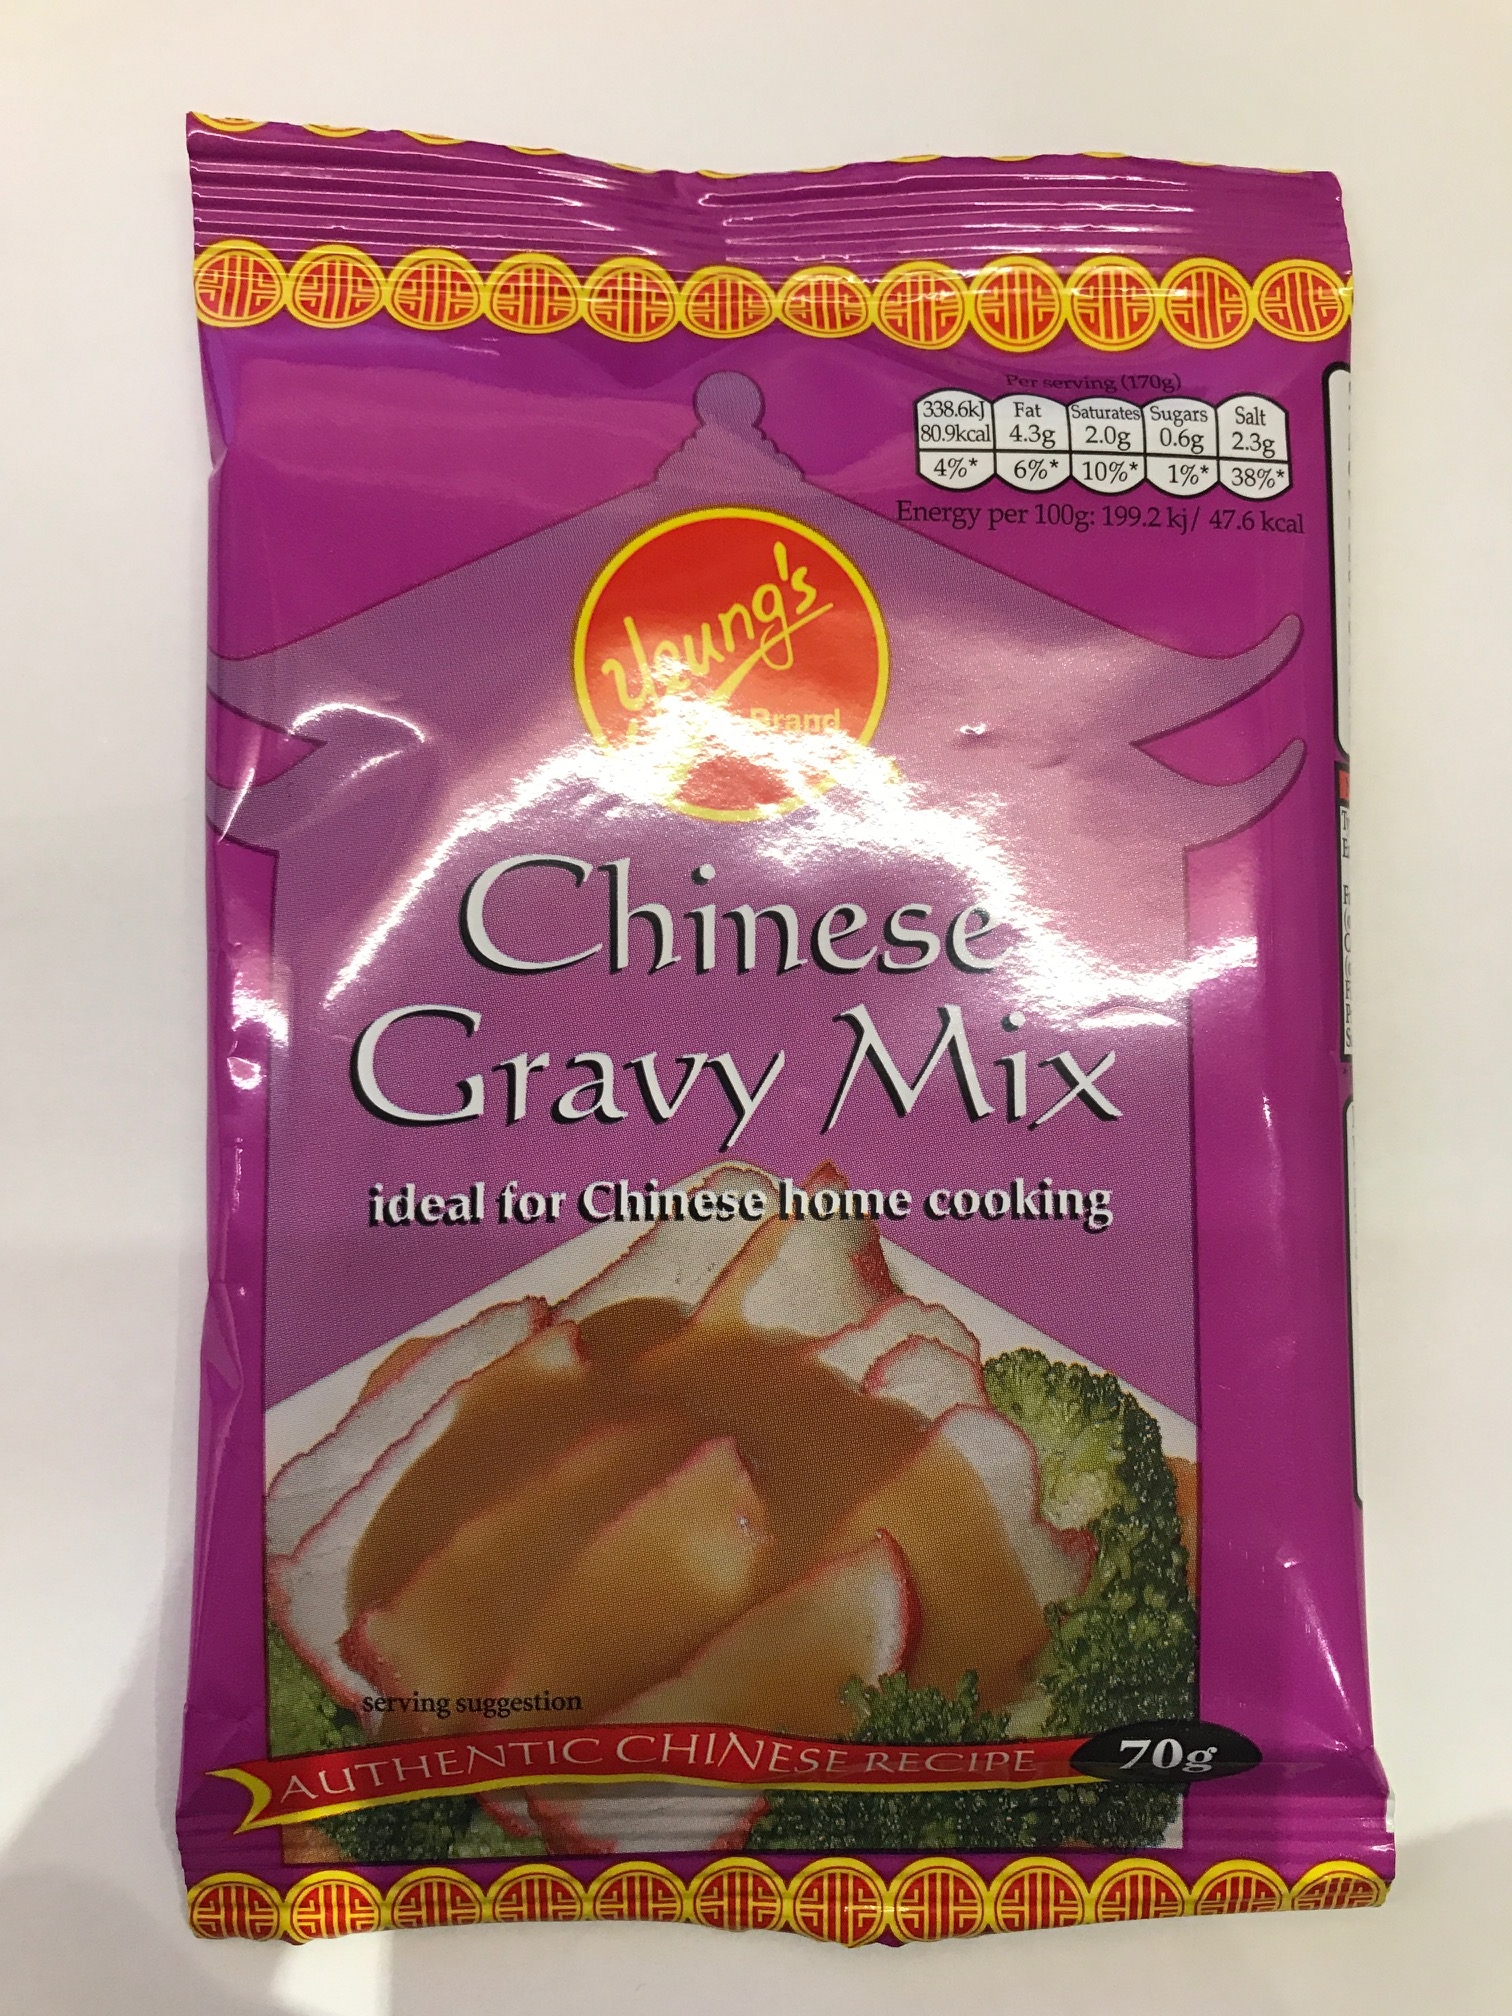 Yeung's Chinese Gravy Mix (ideal for Chinese home cooking) - 70g (10 Packs) 